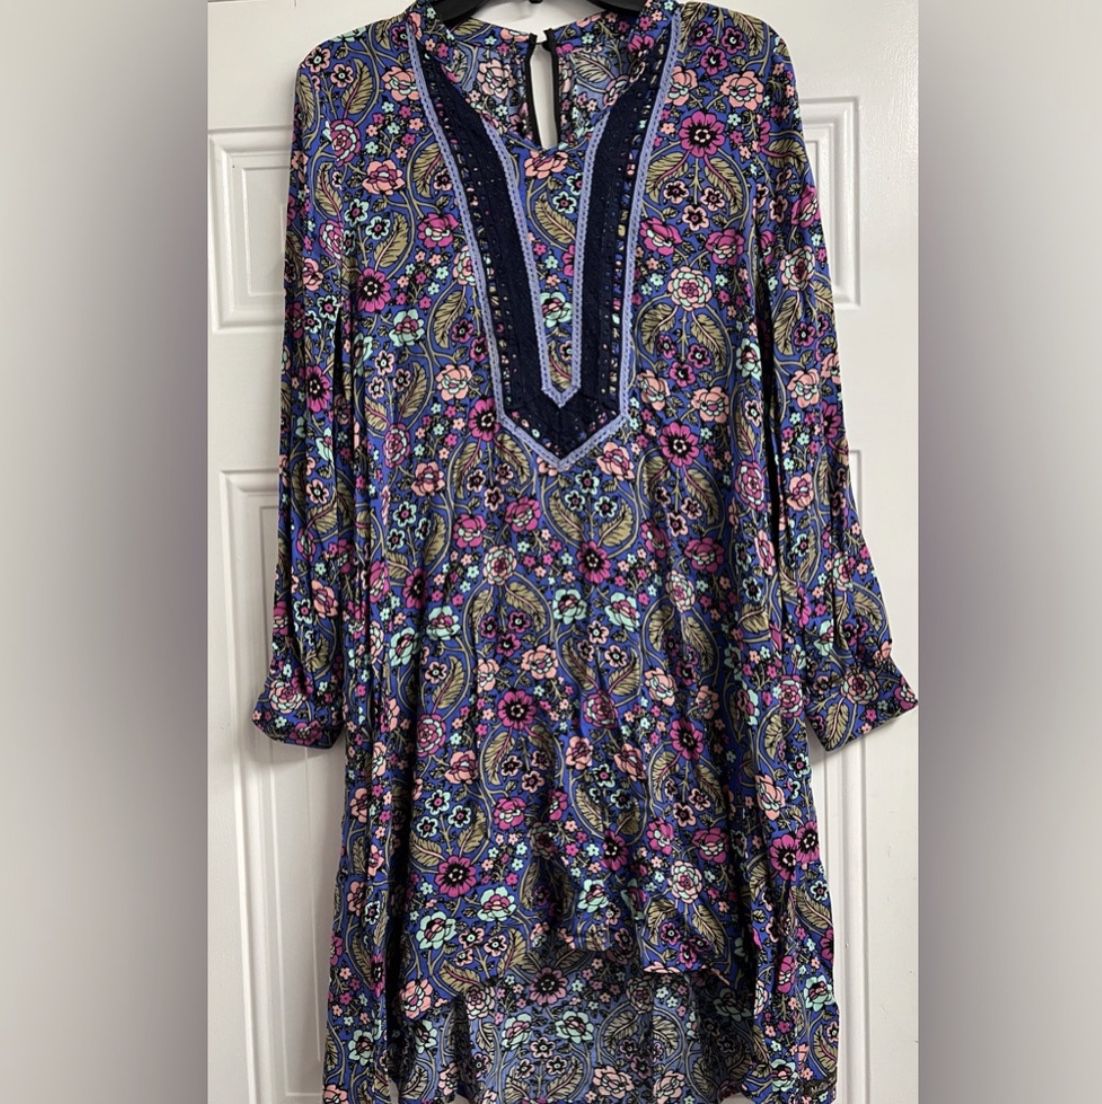 Matilda Jane Thoughts & Dreams floral tunic/dress